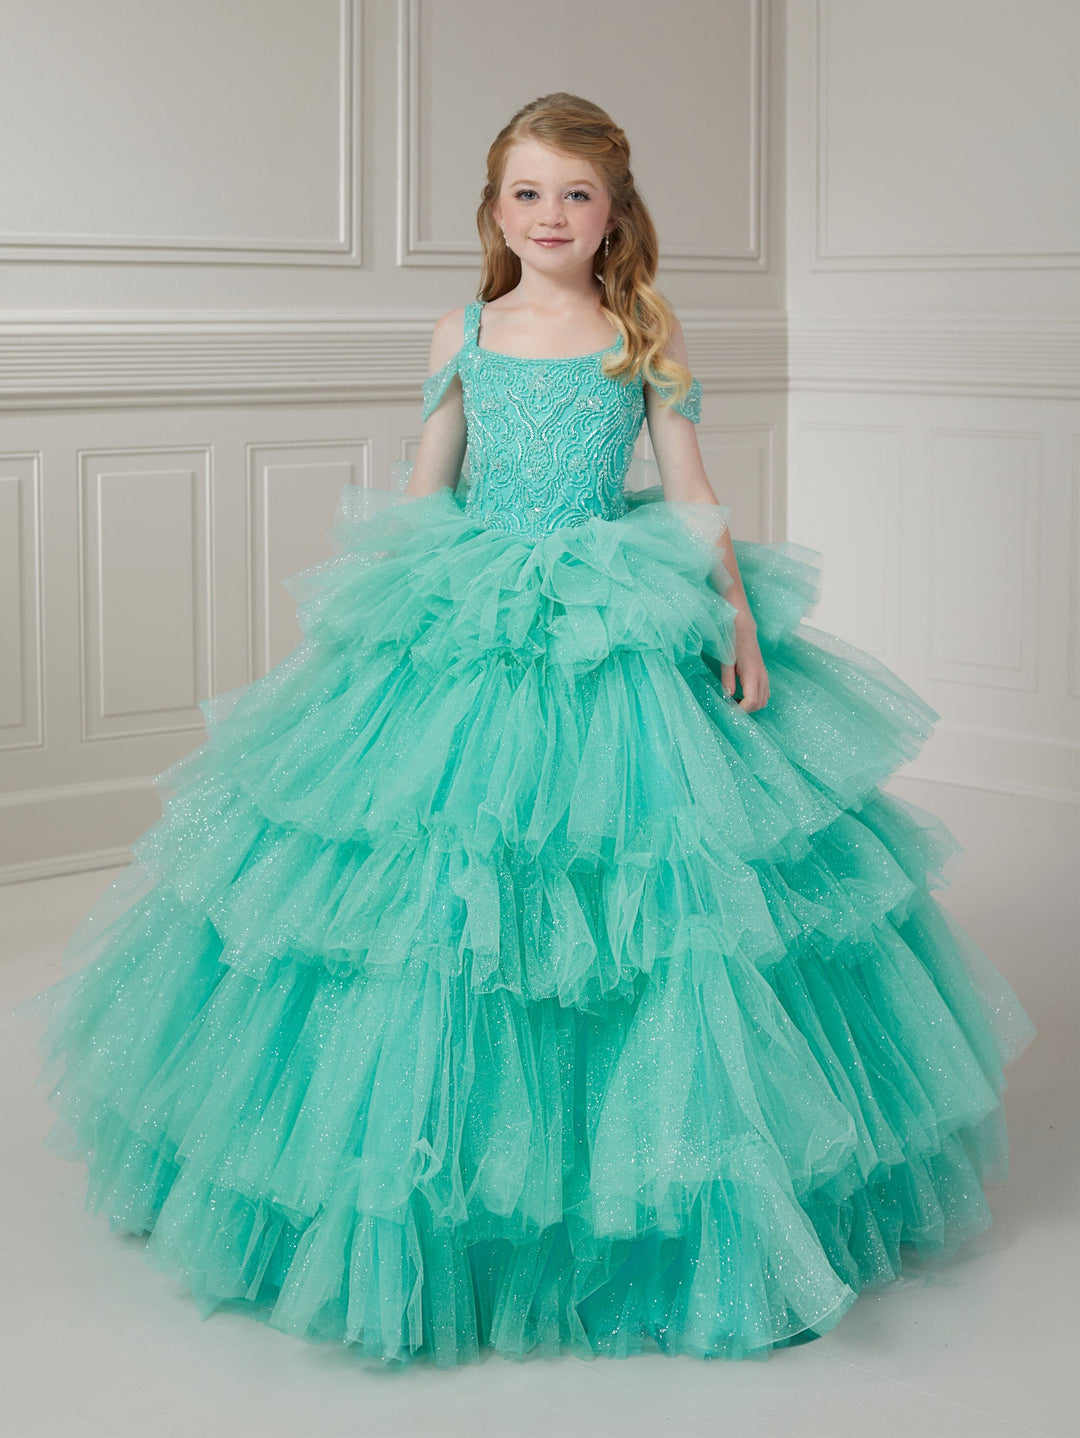 Girls Ruffled Cold Shoulder Gown by Tiffany Princess 13716